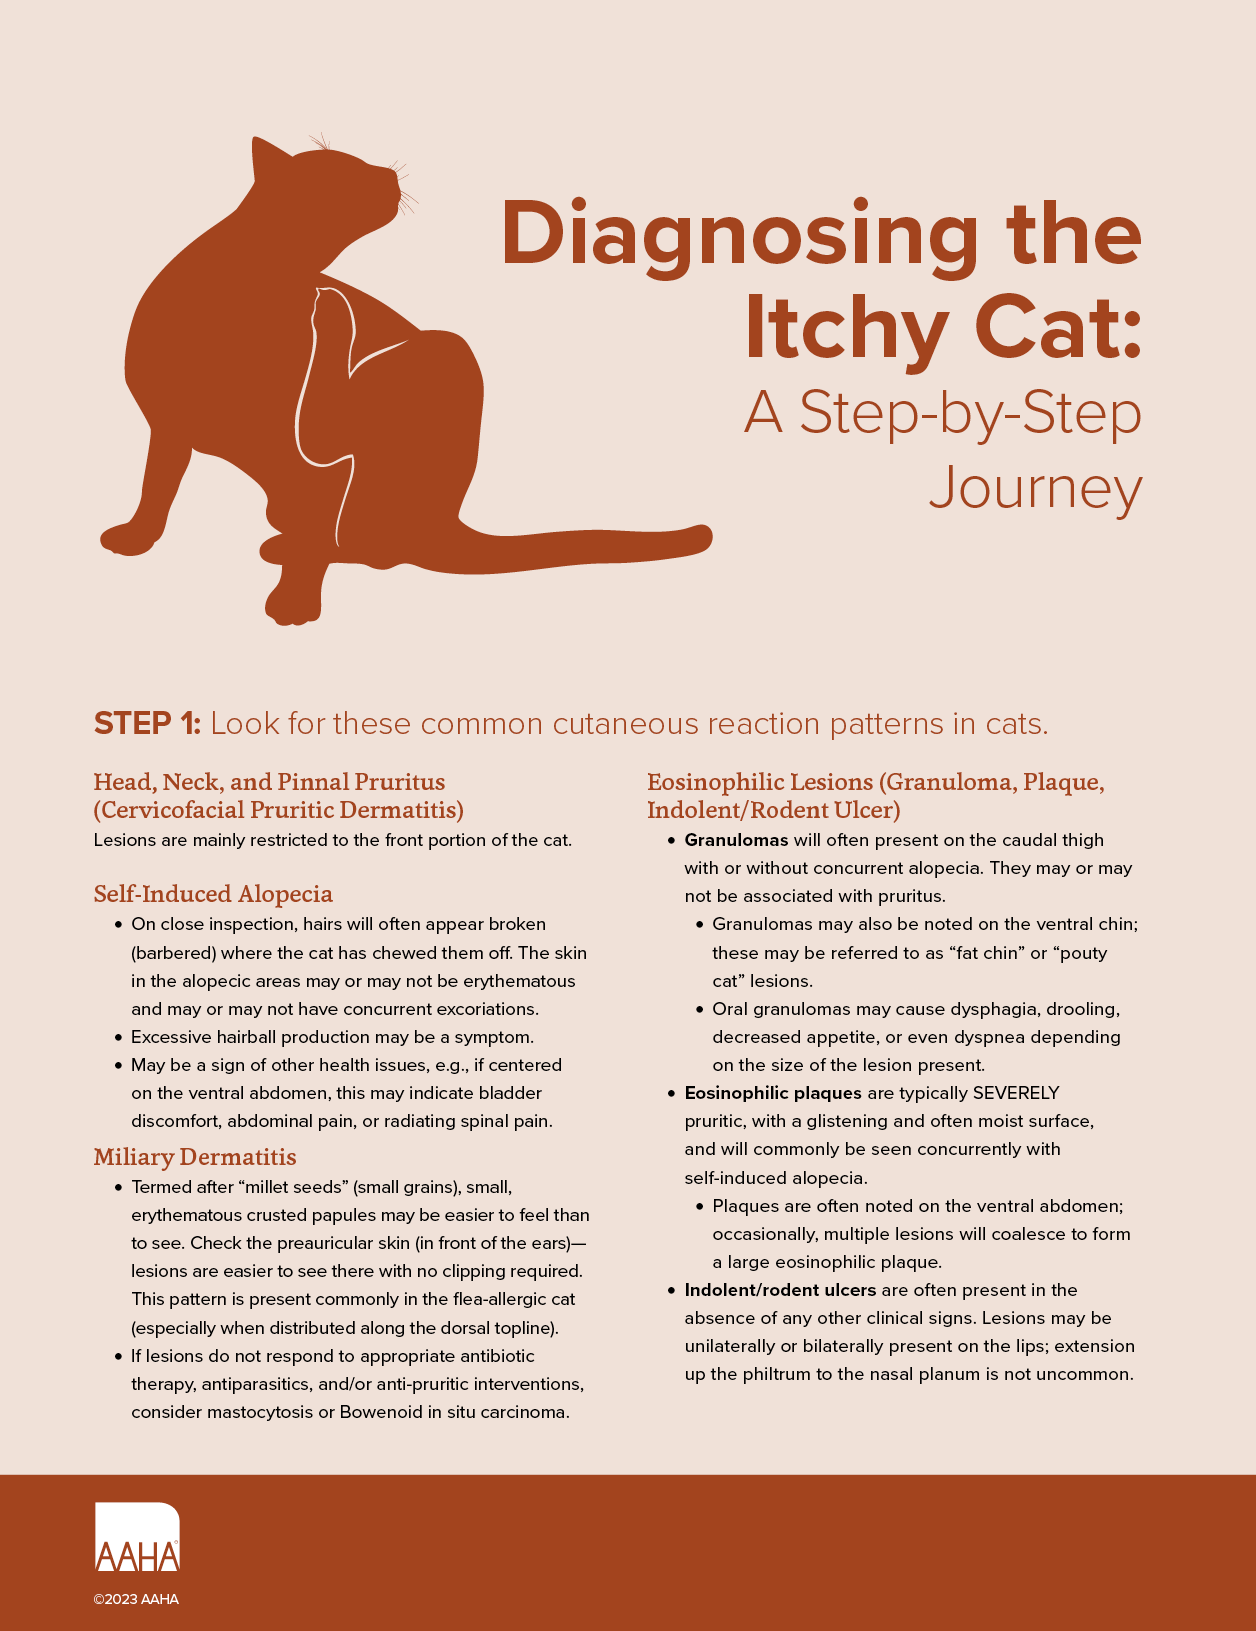 Diagnosing the Itchy Cat